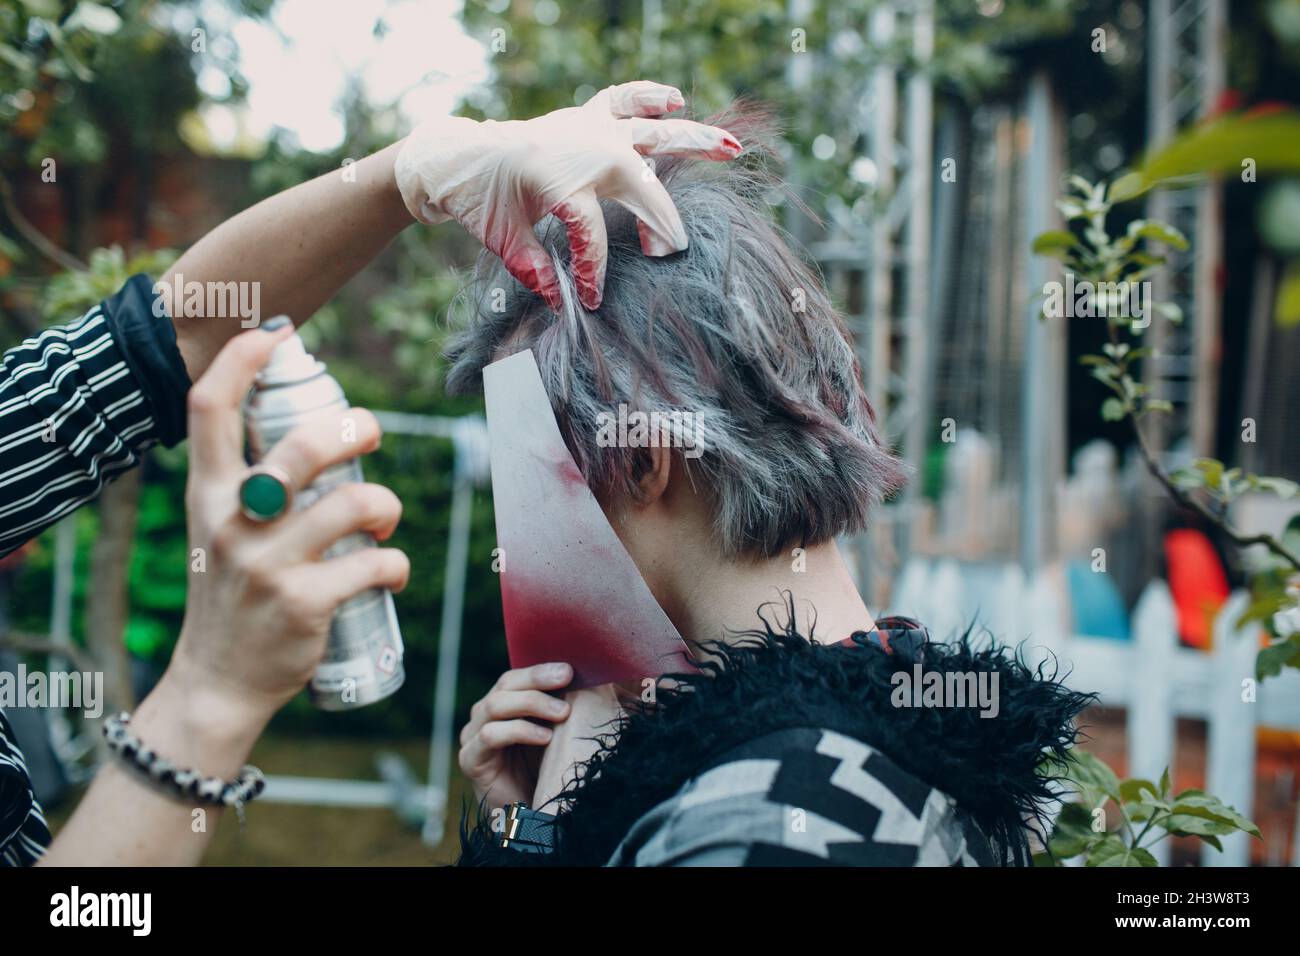 Hairdresser stylist make-up artist dyes the hair of a young man with a closed face from an aerosol can Stock Photo